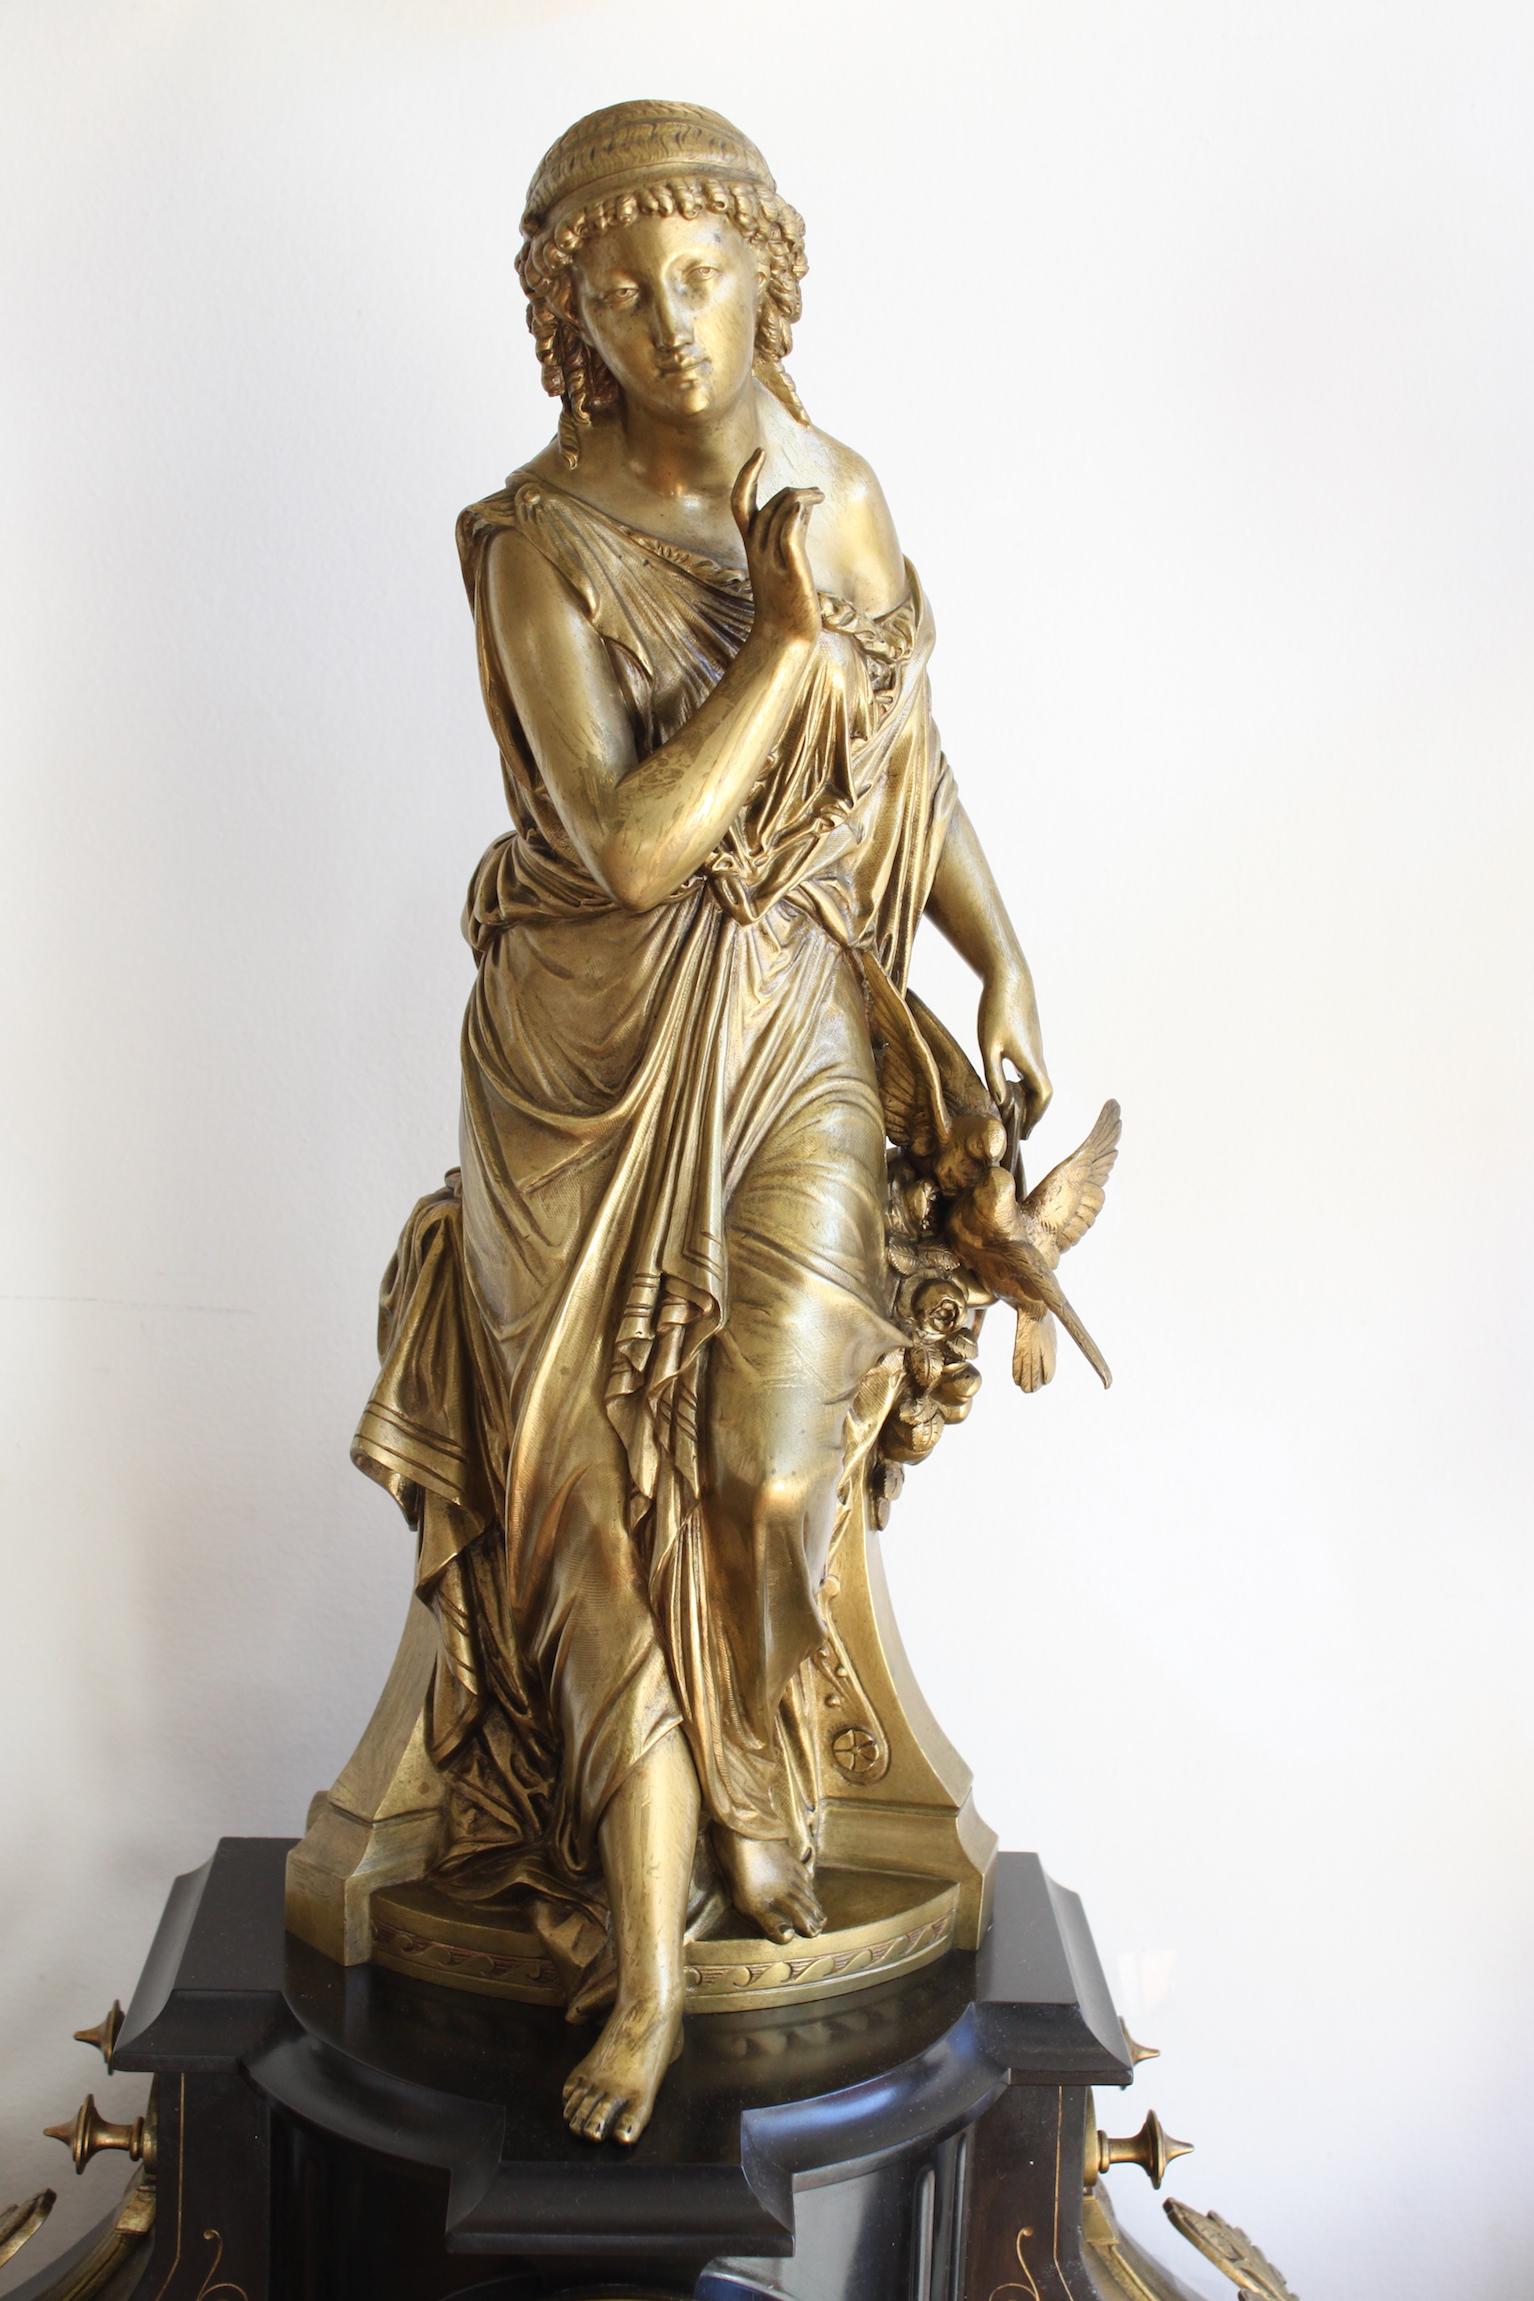 19th century garniture set with clock and candlestick, in marble and bronze, representing an antique woman with birds.
Signed MAGE.
In good state, slight loses and crack on the corner.
Movement in working order.
Dimensions of the two